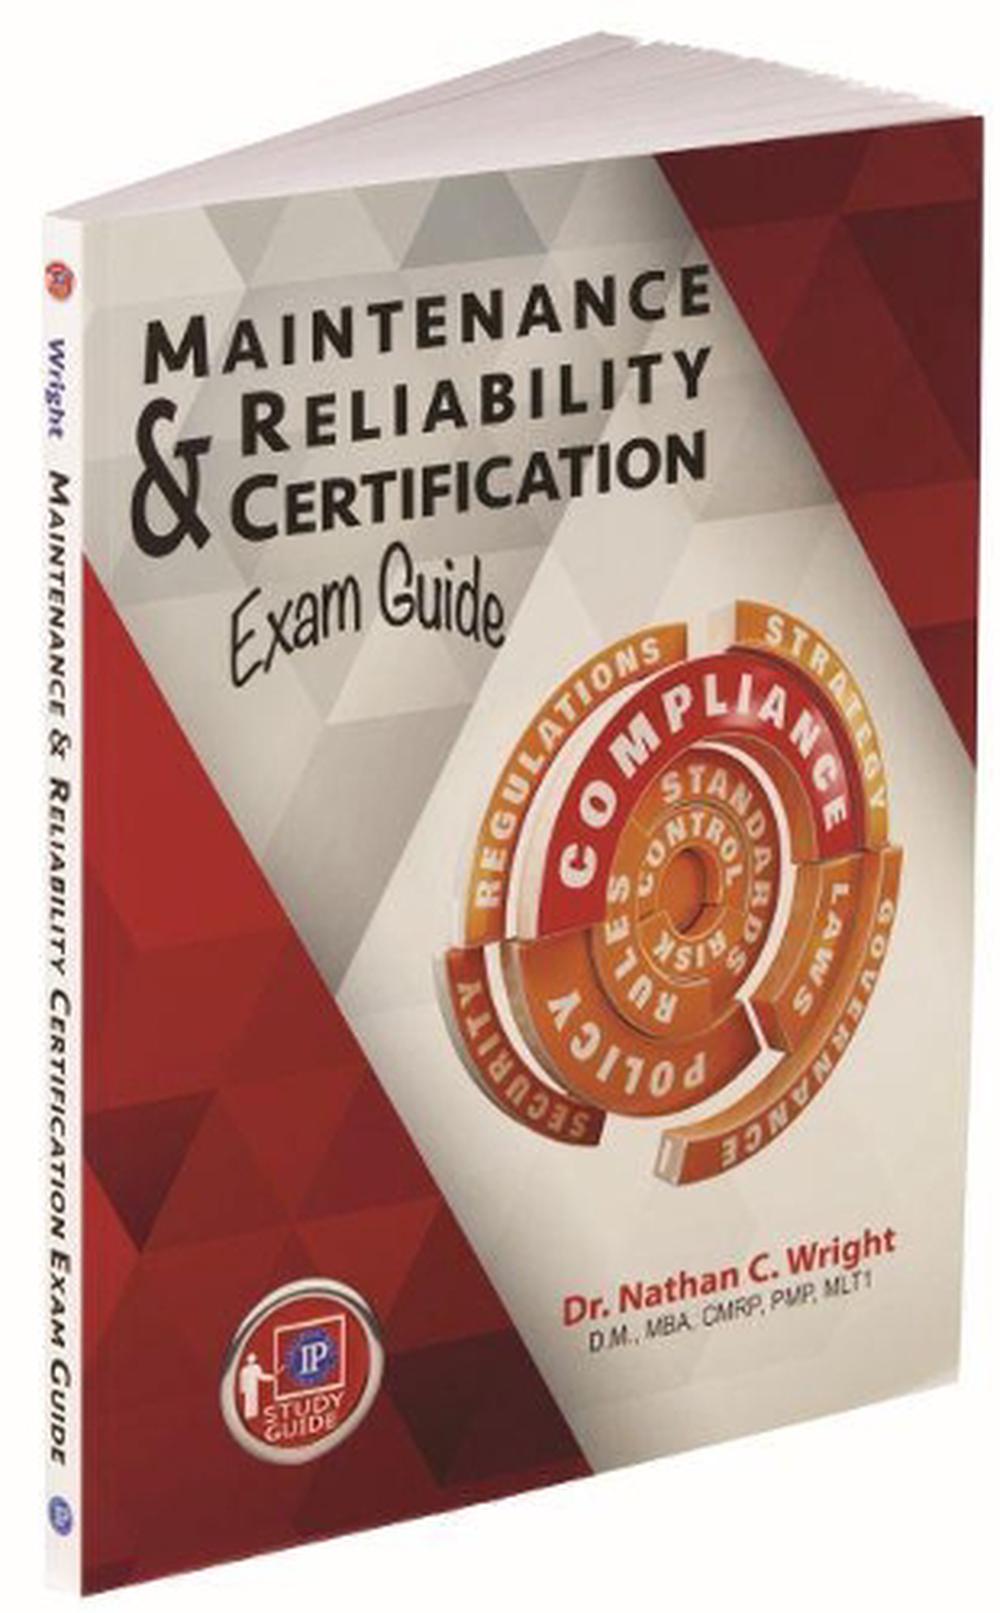 Maintenance and Reliability Certification Exam Guide by Nathan C